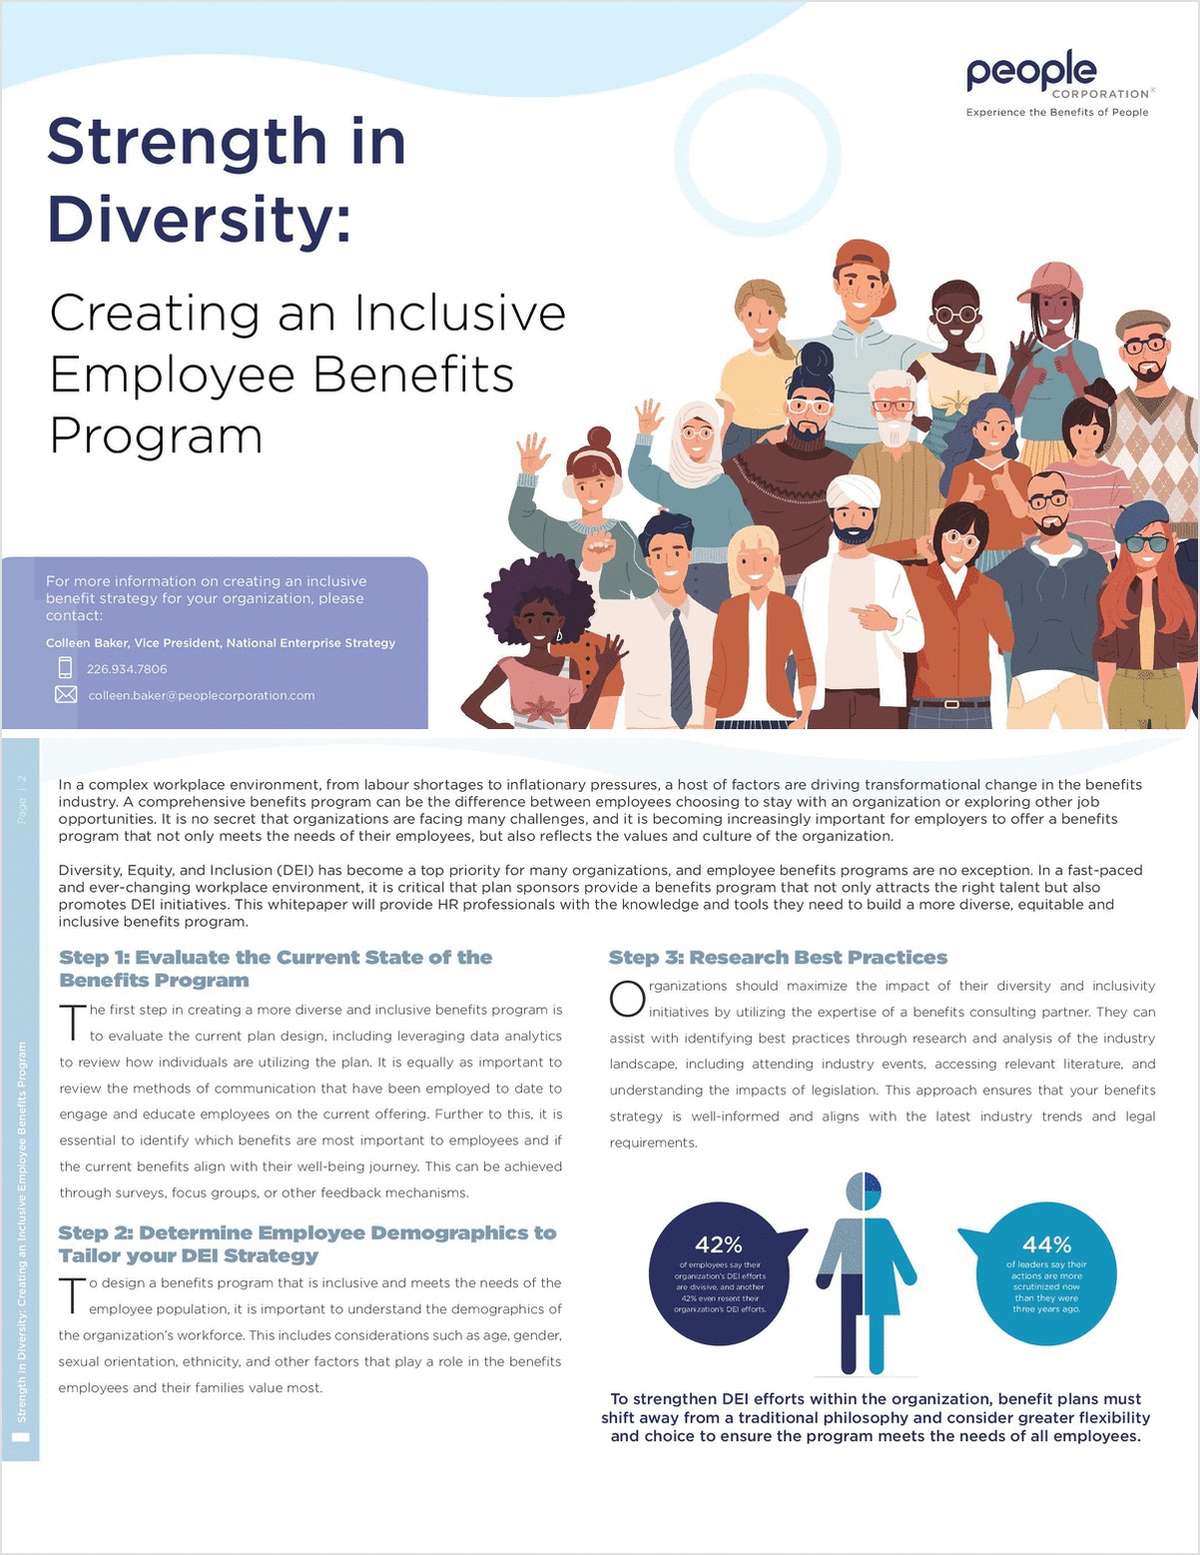 Strength in Diversity: How to Create an Inclusive Employee Benefits Program